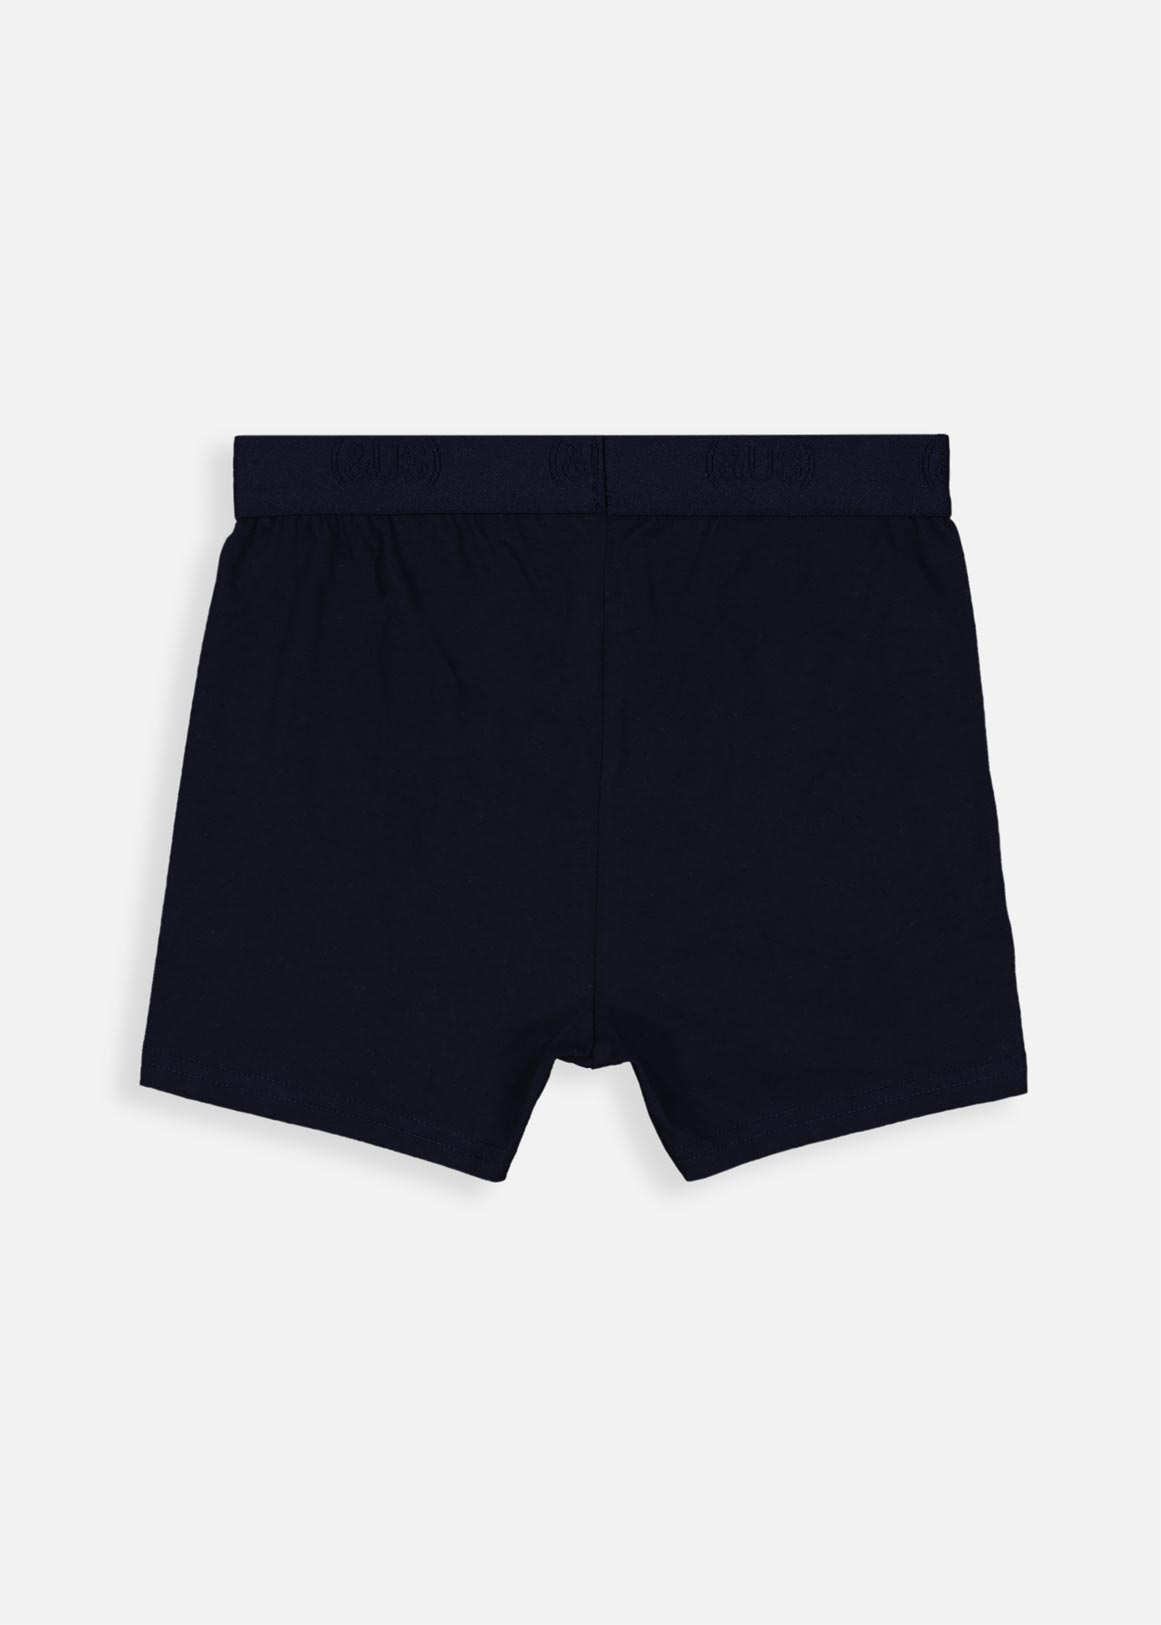 OB 3PK PLAIN TRUNK - Woolworths Mauritius Online